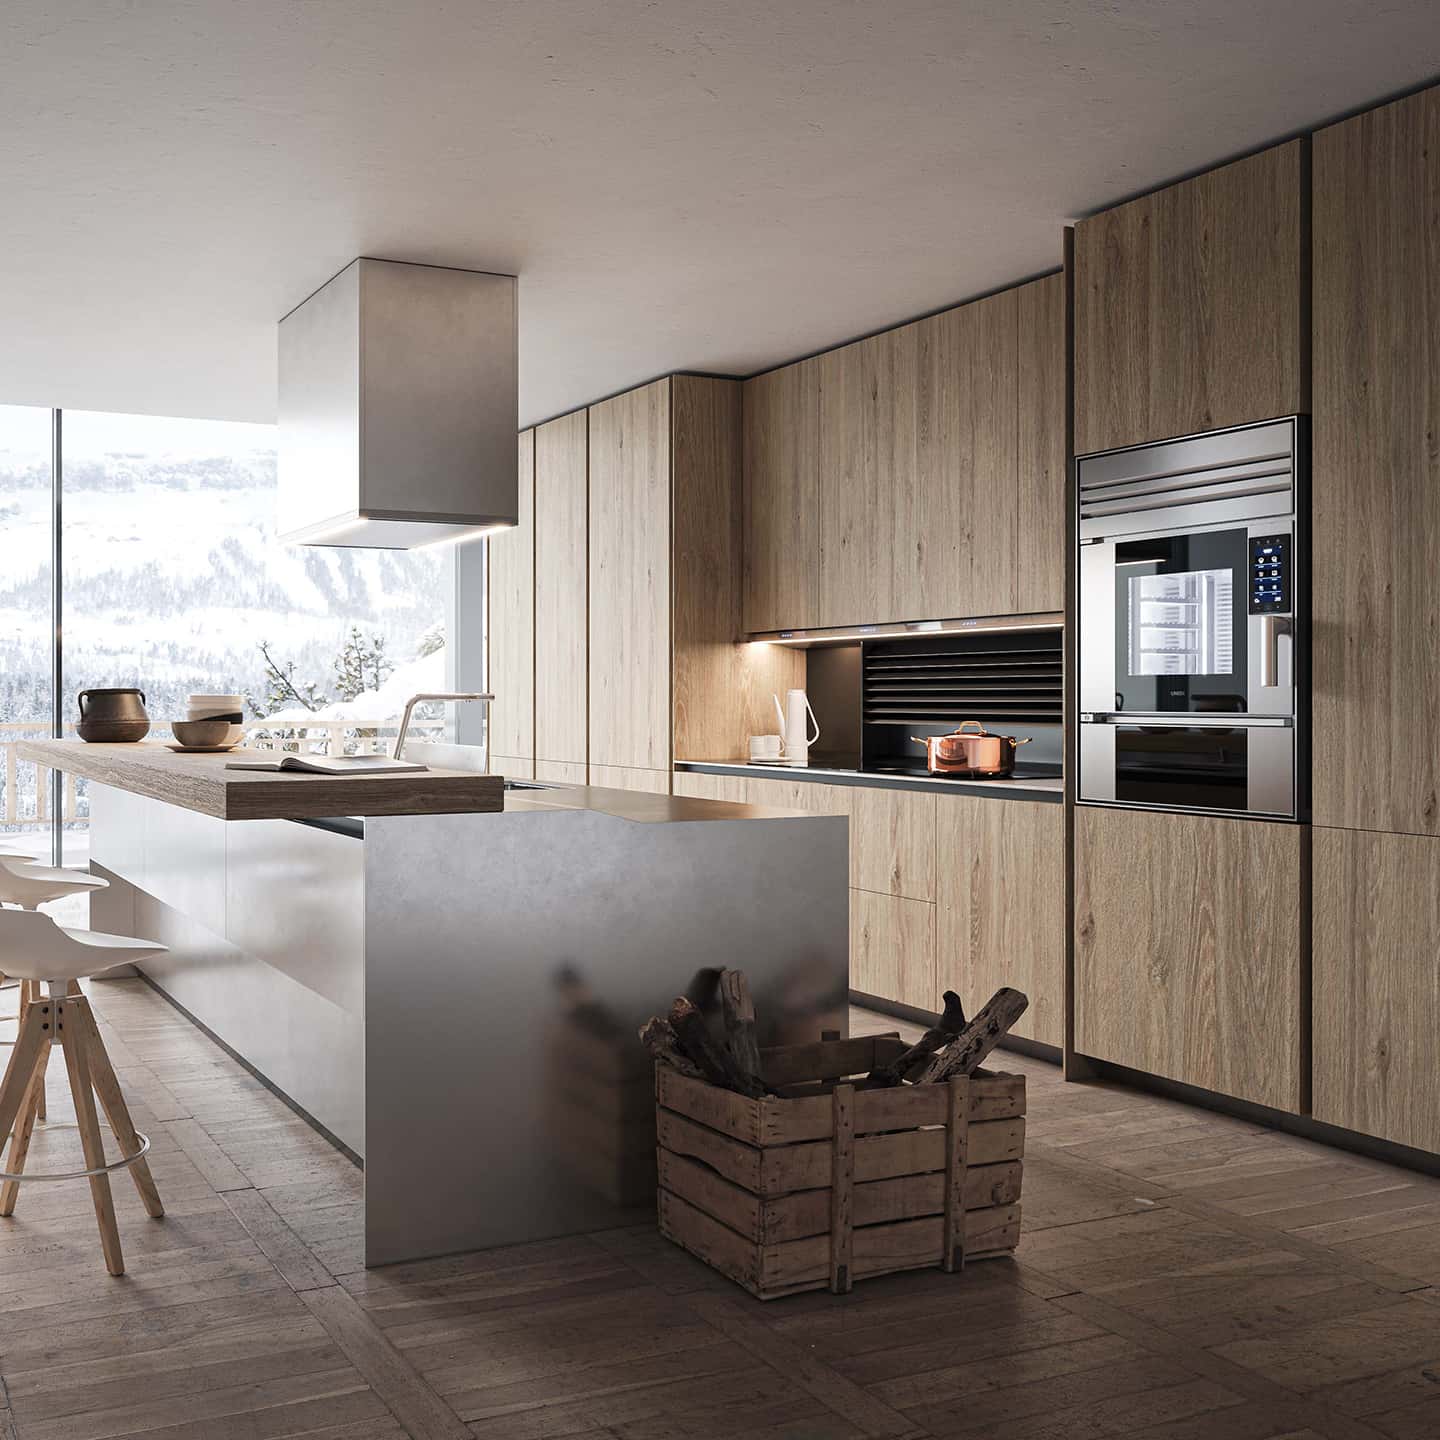 Minimalist kitchen of a mountain chalet in Cortina D'Ampezzo with Unox Casa's smart ovens